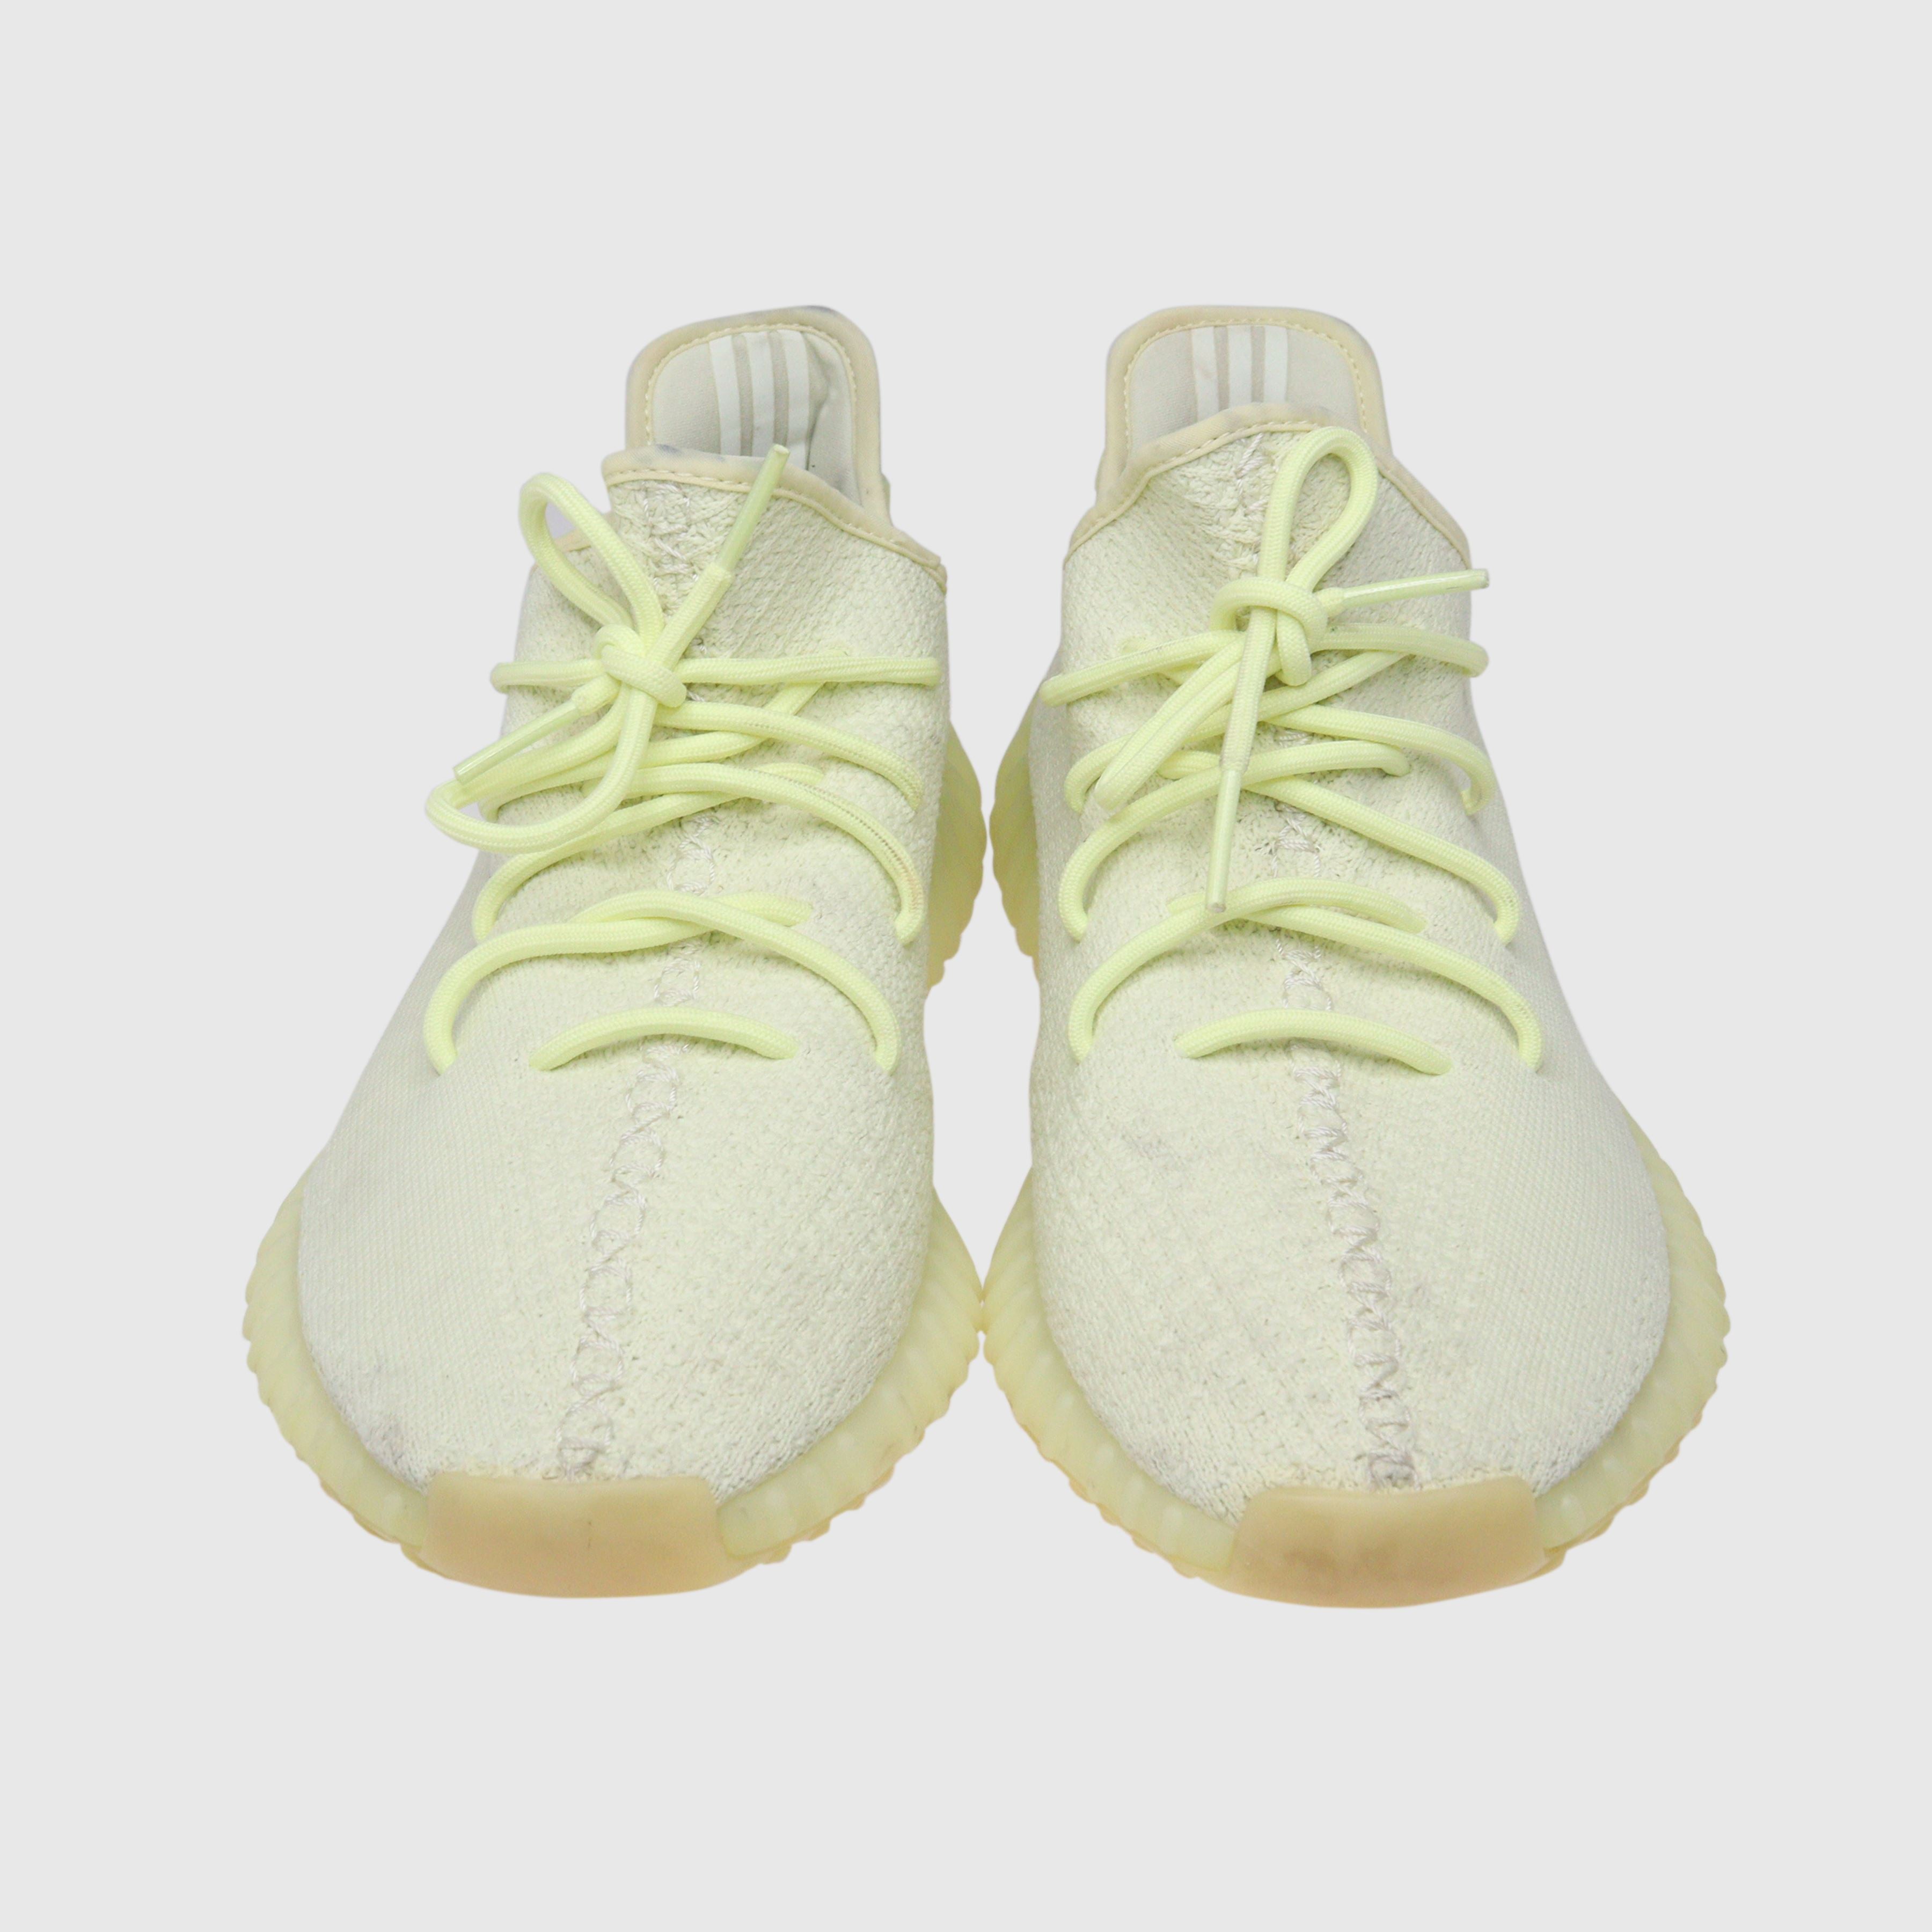 Cream Yeezy Ultra Boots Sneaker Shoes Adidas 